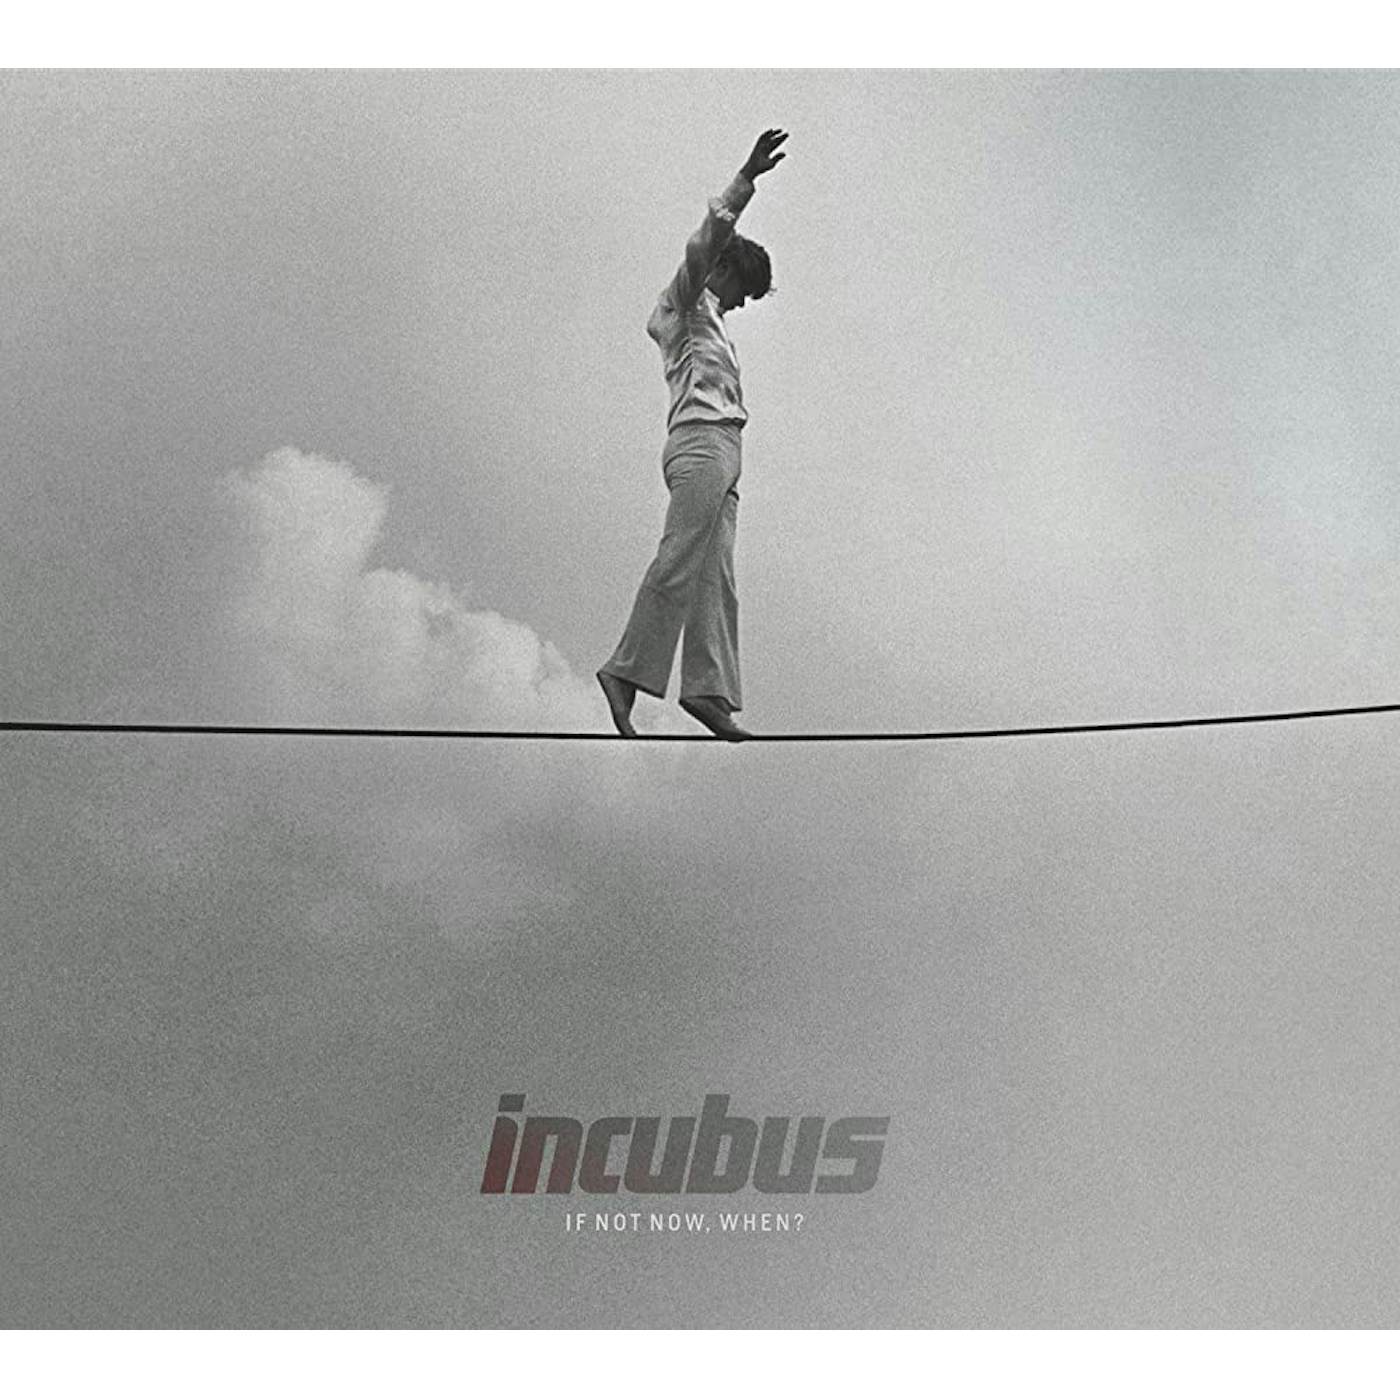 Incubus - If Not Now, When?